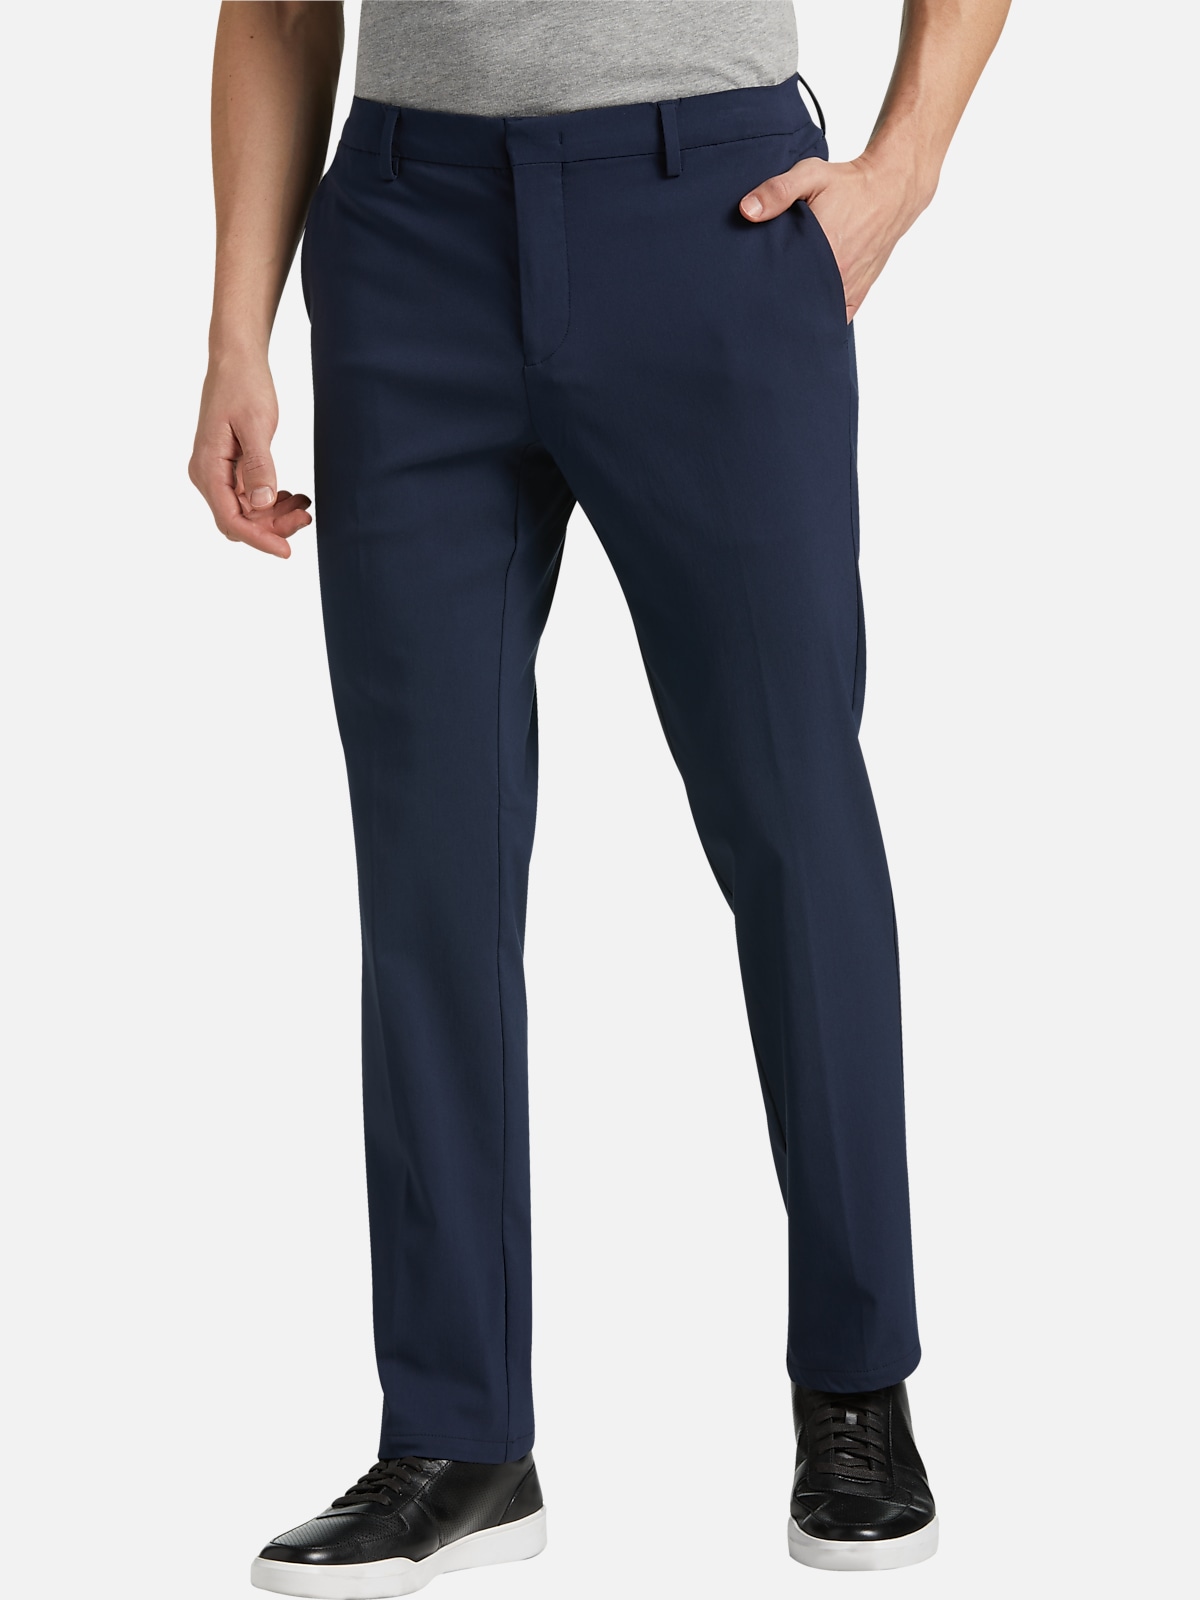 Awearness Kenneth Cole Slim Fit Performance Tech Pants | All Sale| Men ...